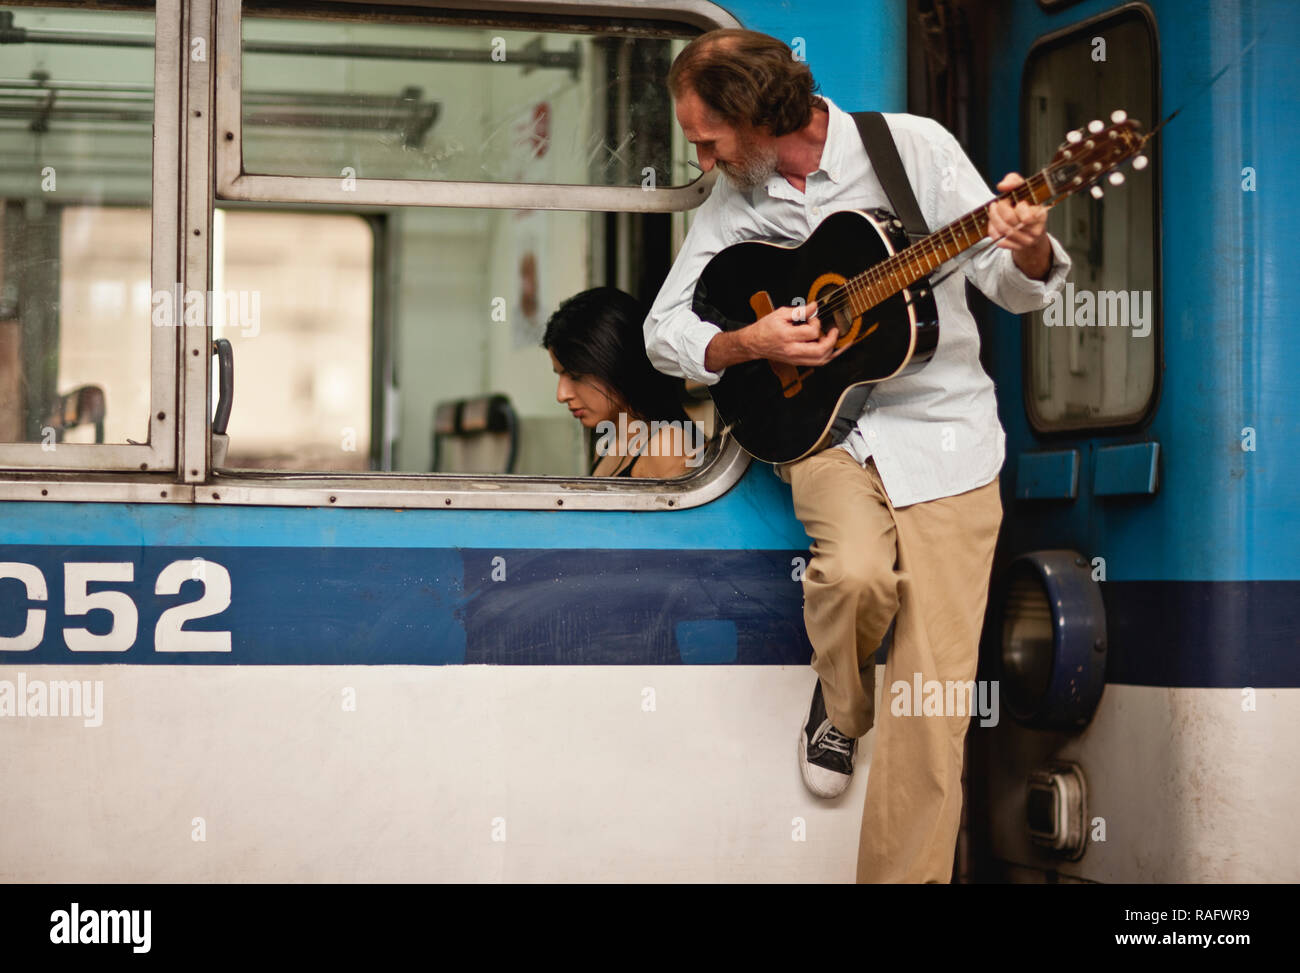 Man leaning on subway car playing guitar while checking out a female passenger. Stock Photo